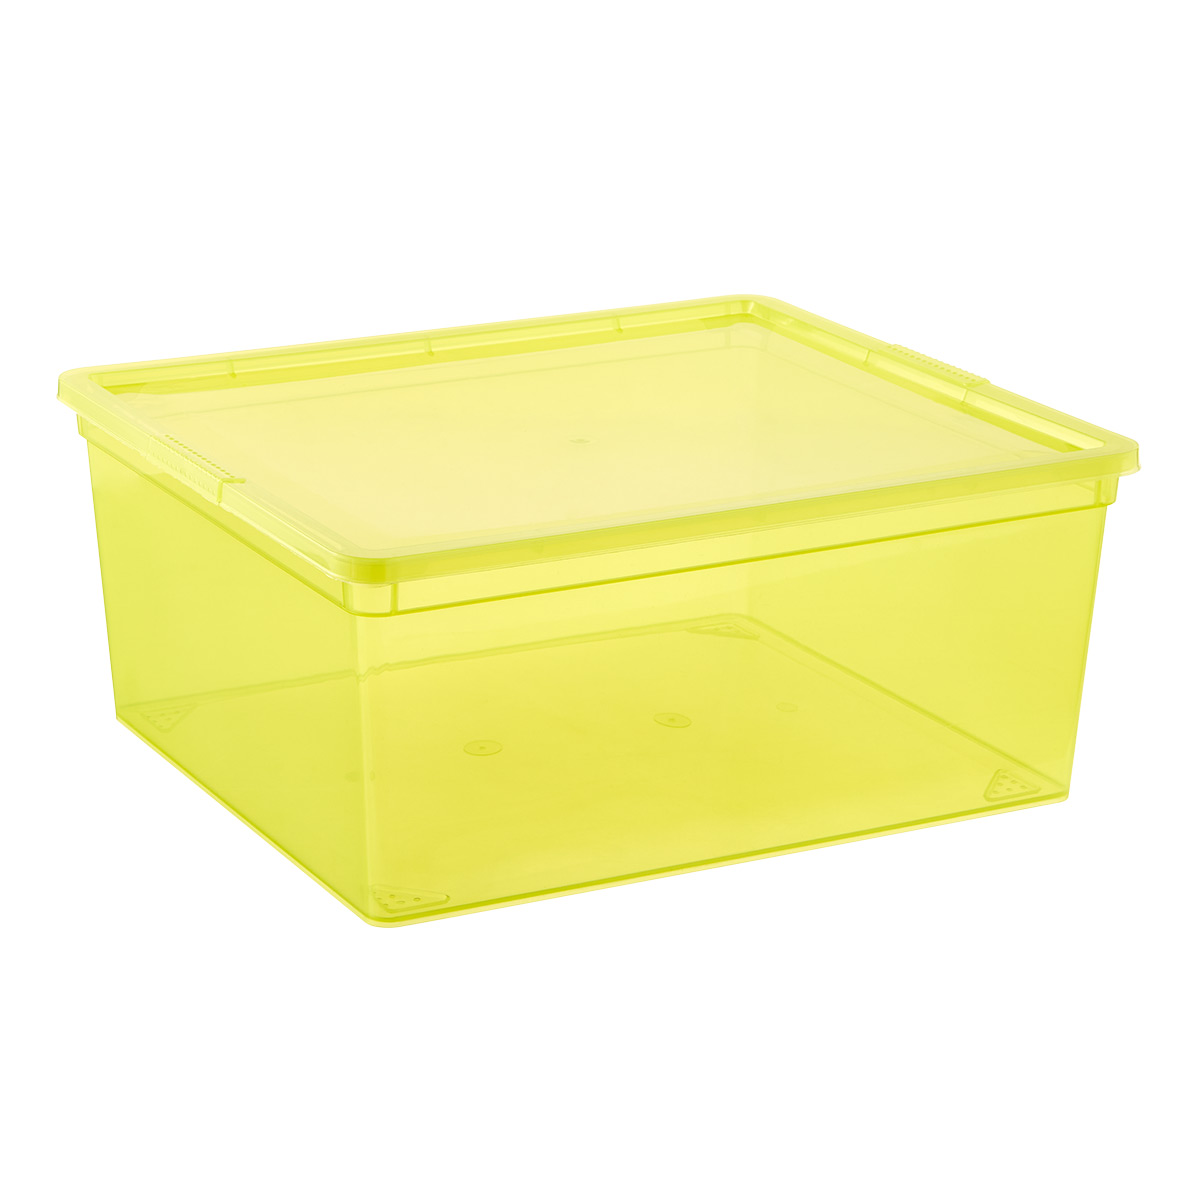 https://images.containerstore.com/catalogimages/434126/10085542_large_our_tidy_box_lemon.jpg